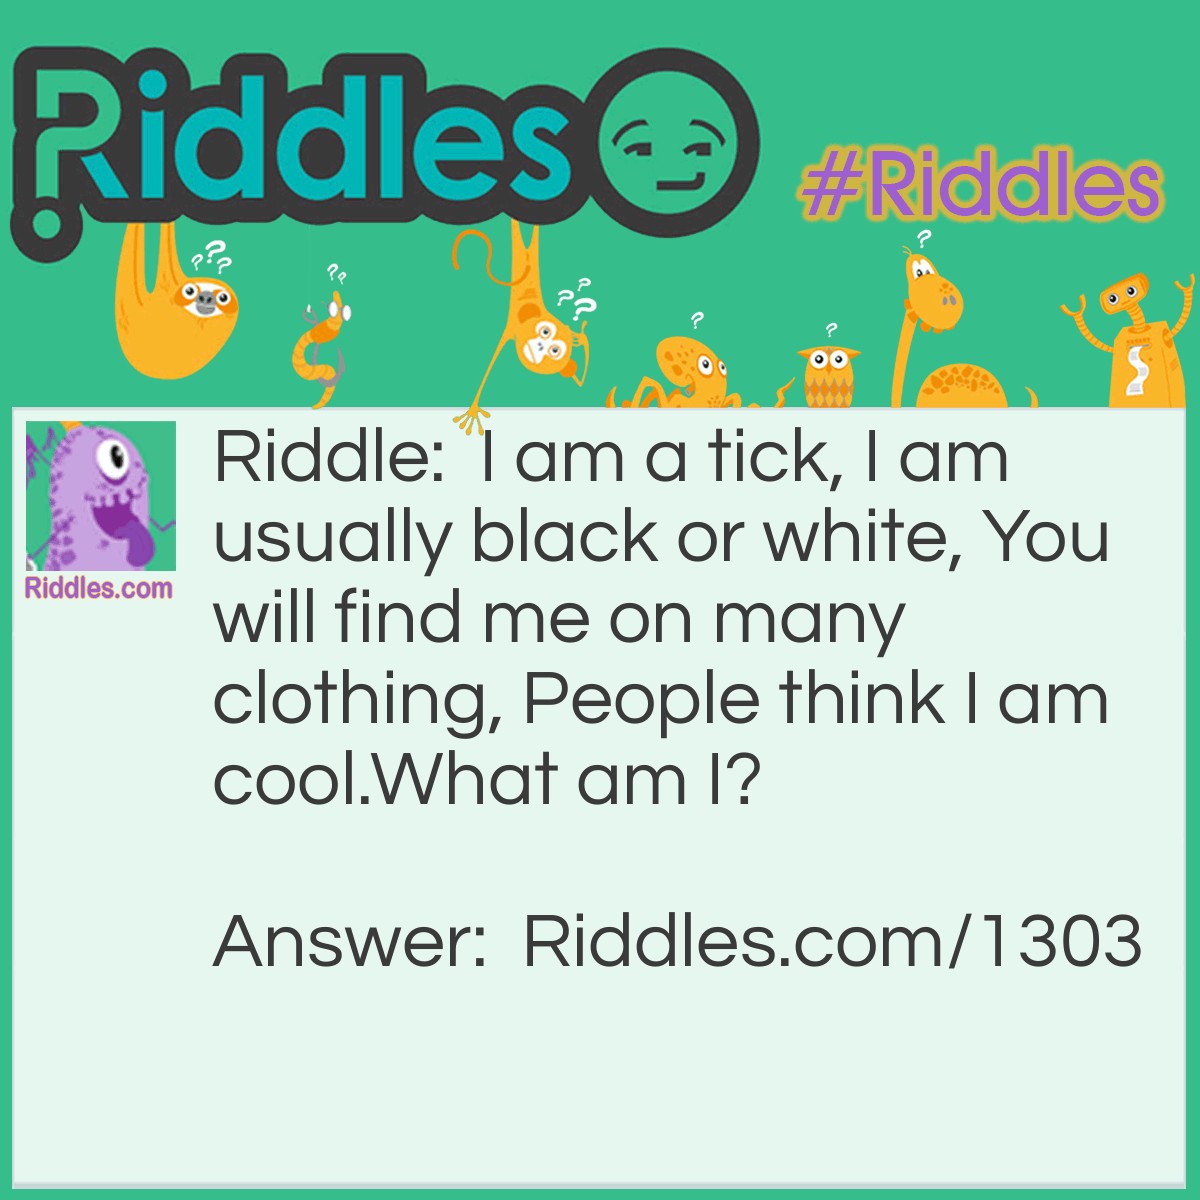 Riddle: I am a tick, I am usually black or white, You will find me on many clothing, People think I am cool.
What am I? Answer: The Nike Symbol.